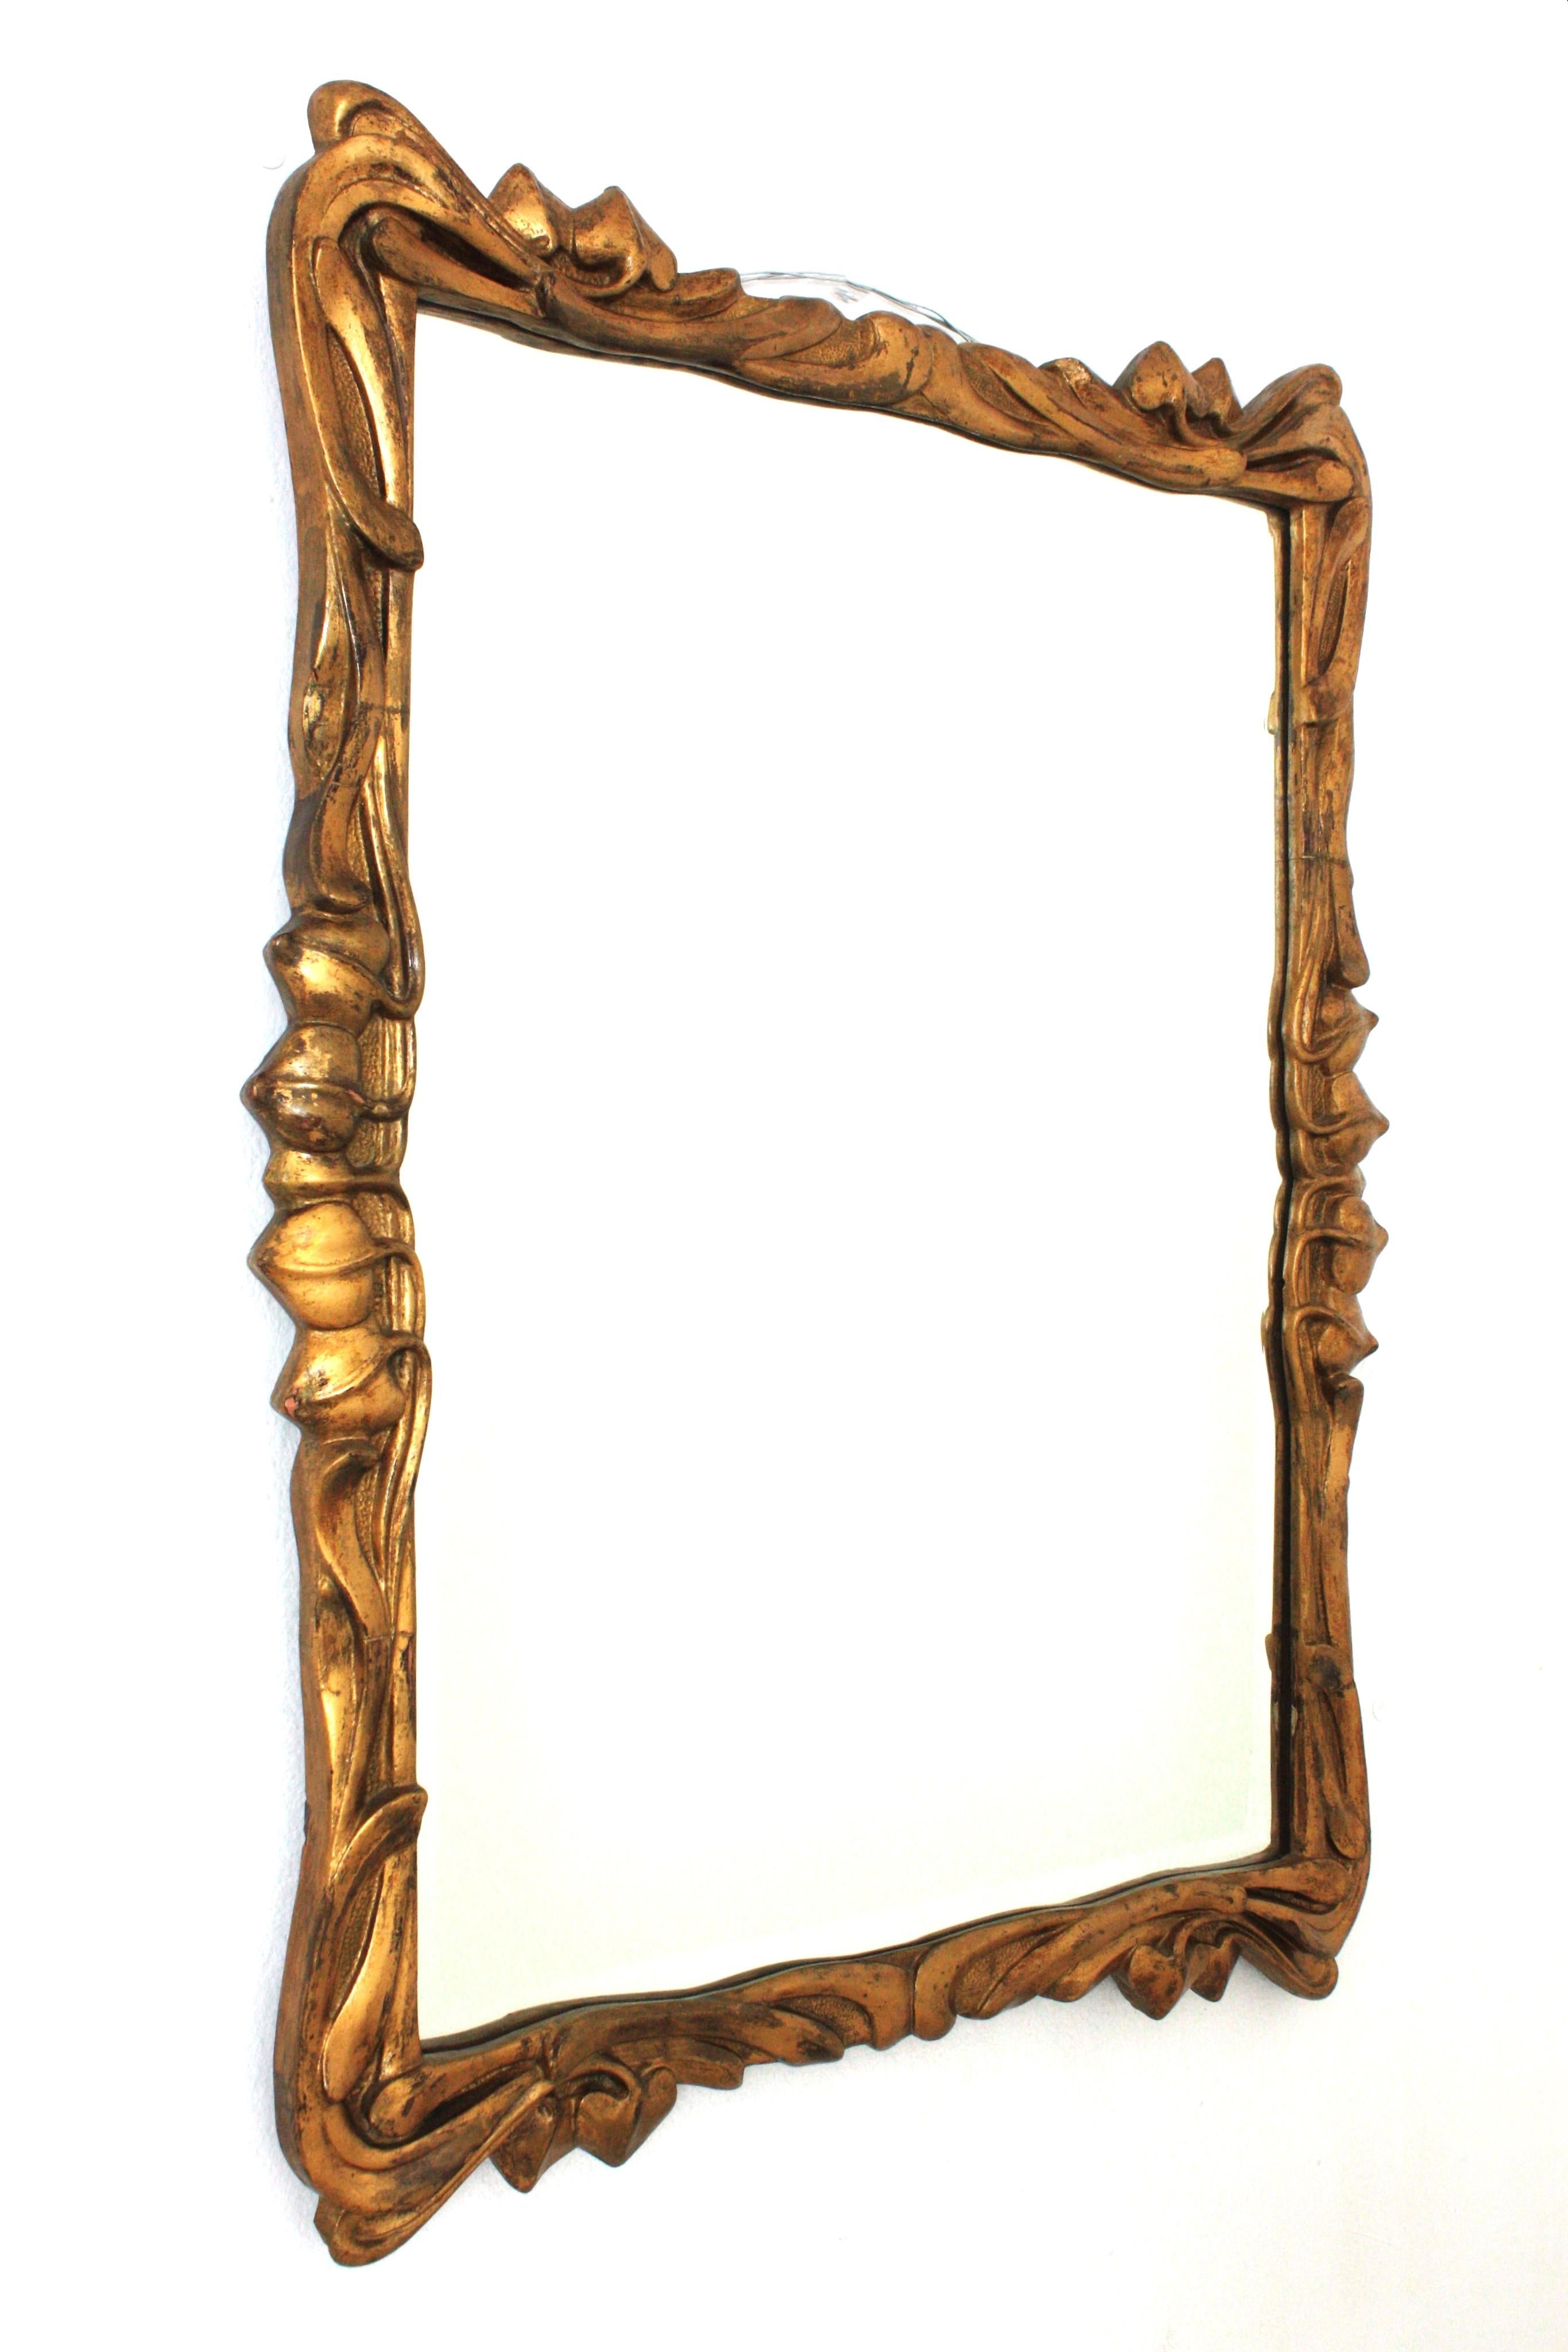 Art Nouveau Rectangular Mirror with Foliage Frame, Wood, Gold Leaf

Outstanding finely carved wood Art Nouveau mirror. Spain, 1930s
Carved wood and gold leaf gilding.
The frame has finely carved branches and leaf details thorough. Eye-catching